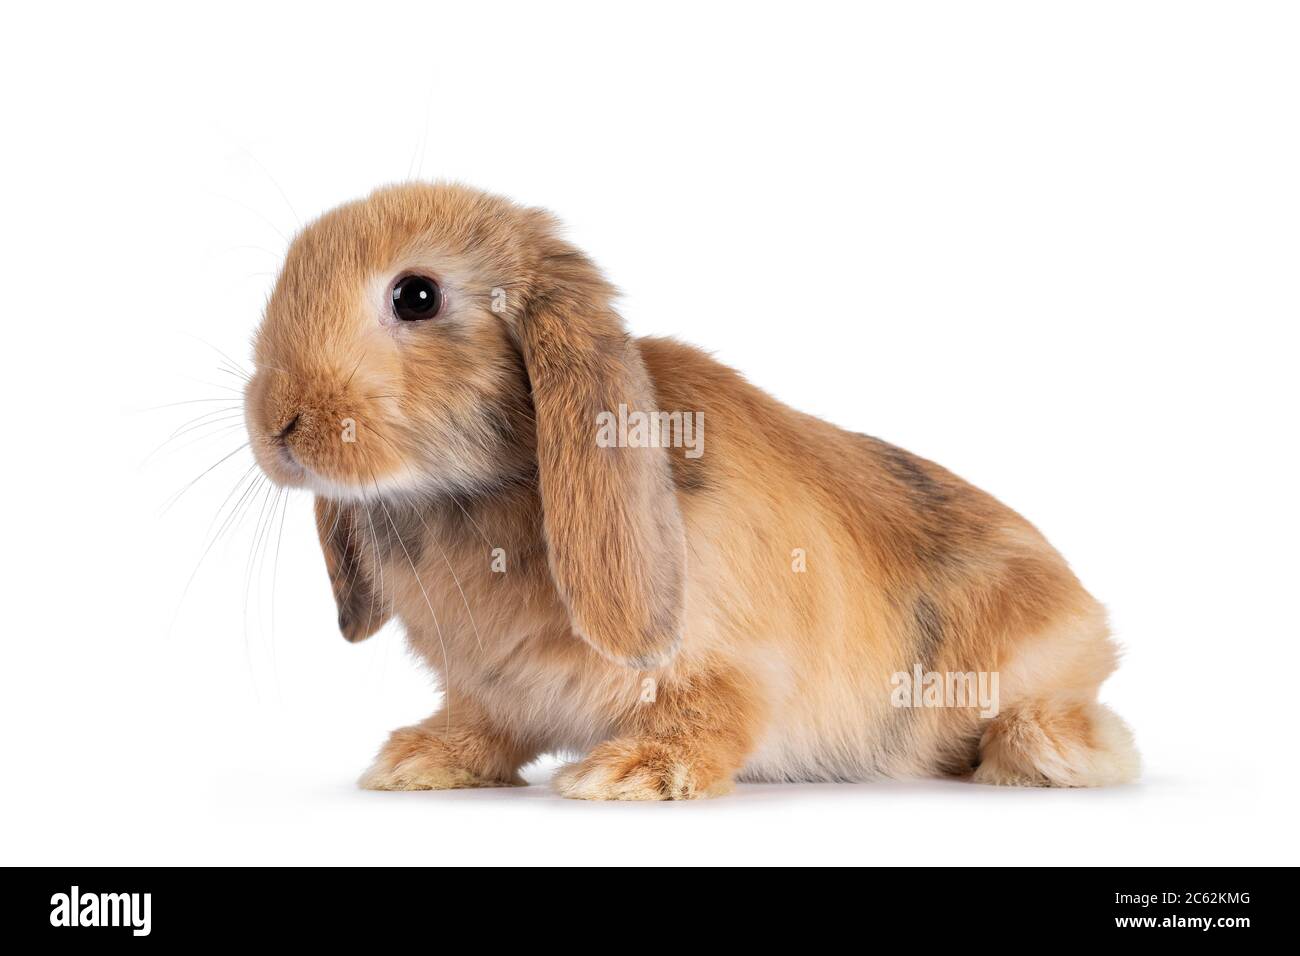 Sweet solid brown rabbit, sitting side ways with head up. Looking towards camera. Isolated on white background. Stock Photo